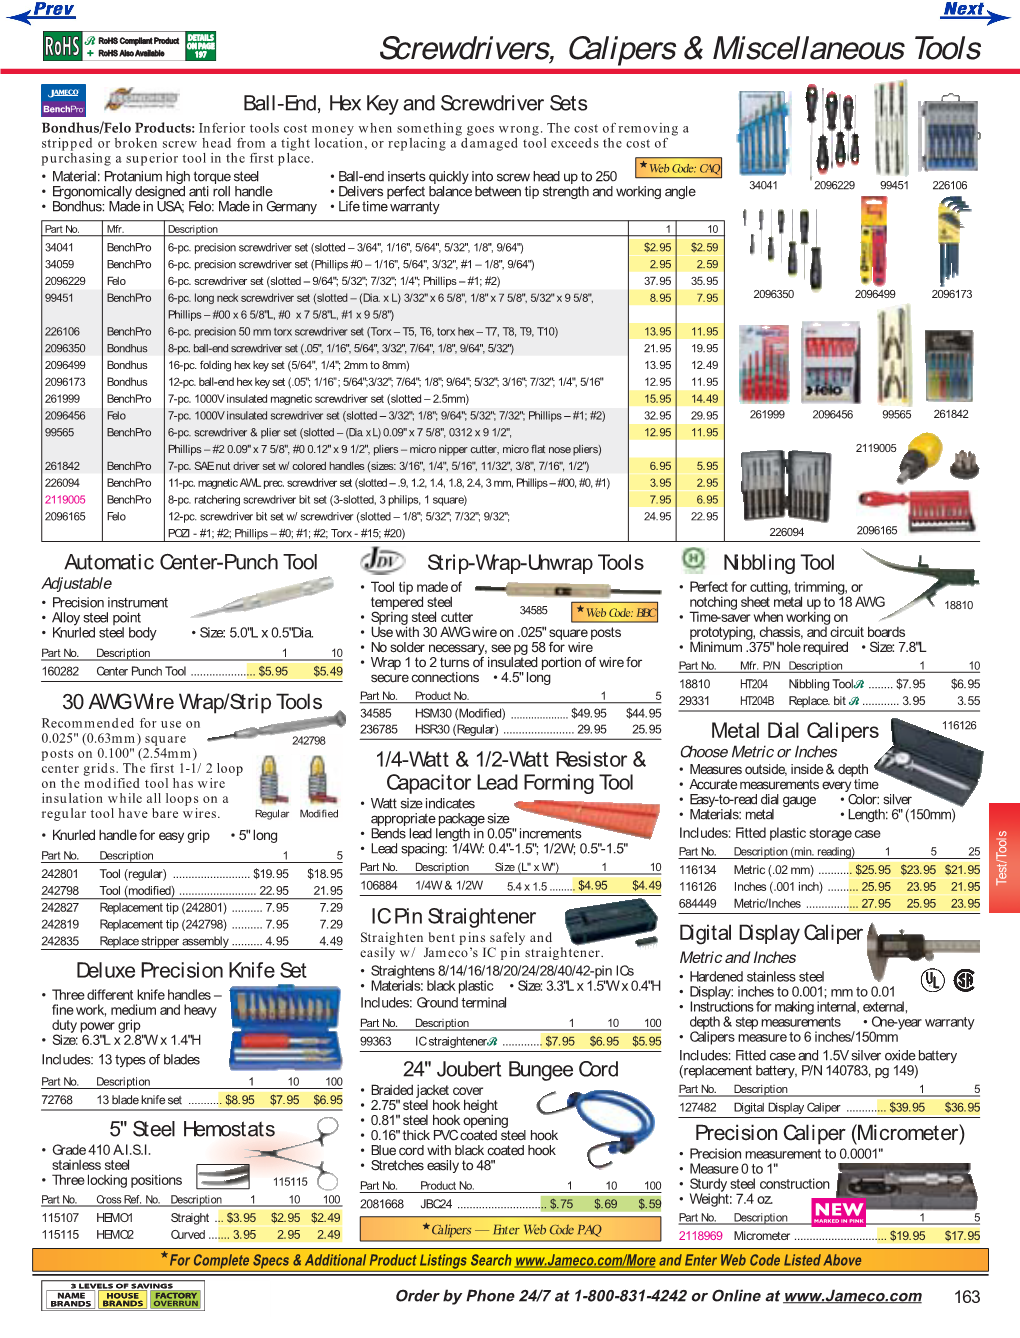 Screwdrivers, Calipers & Miscellaneous Tools